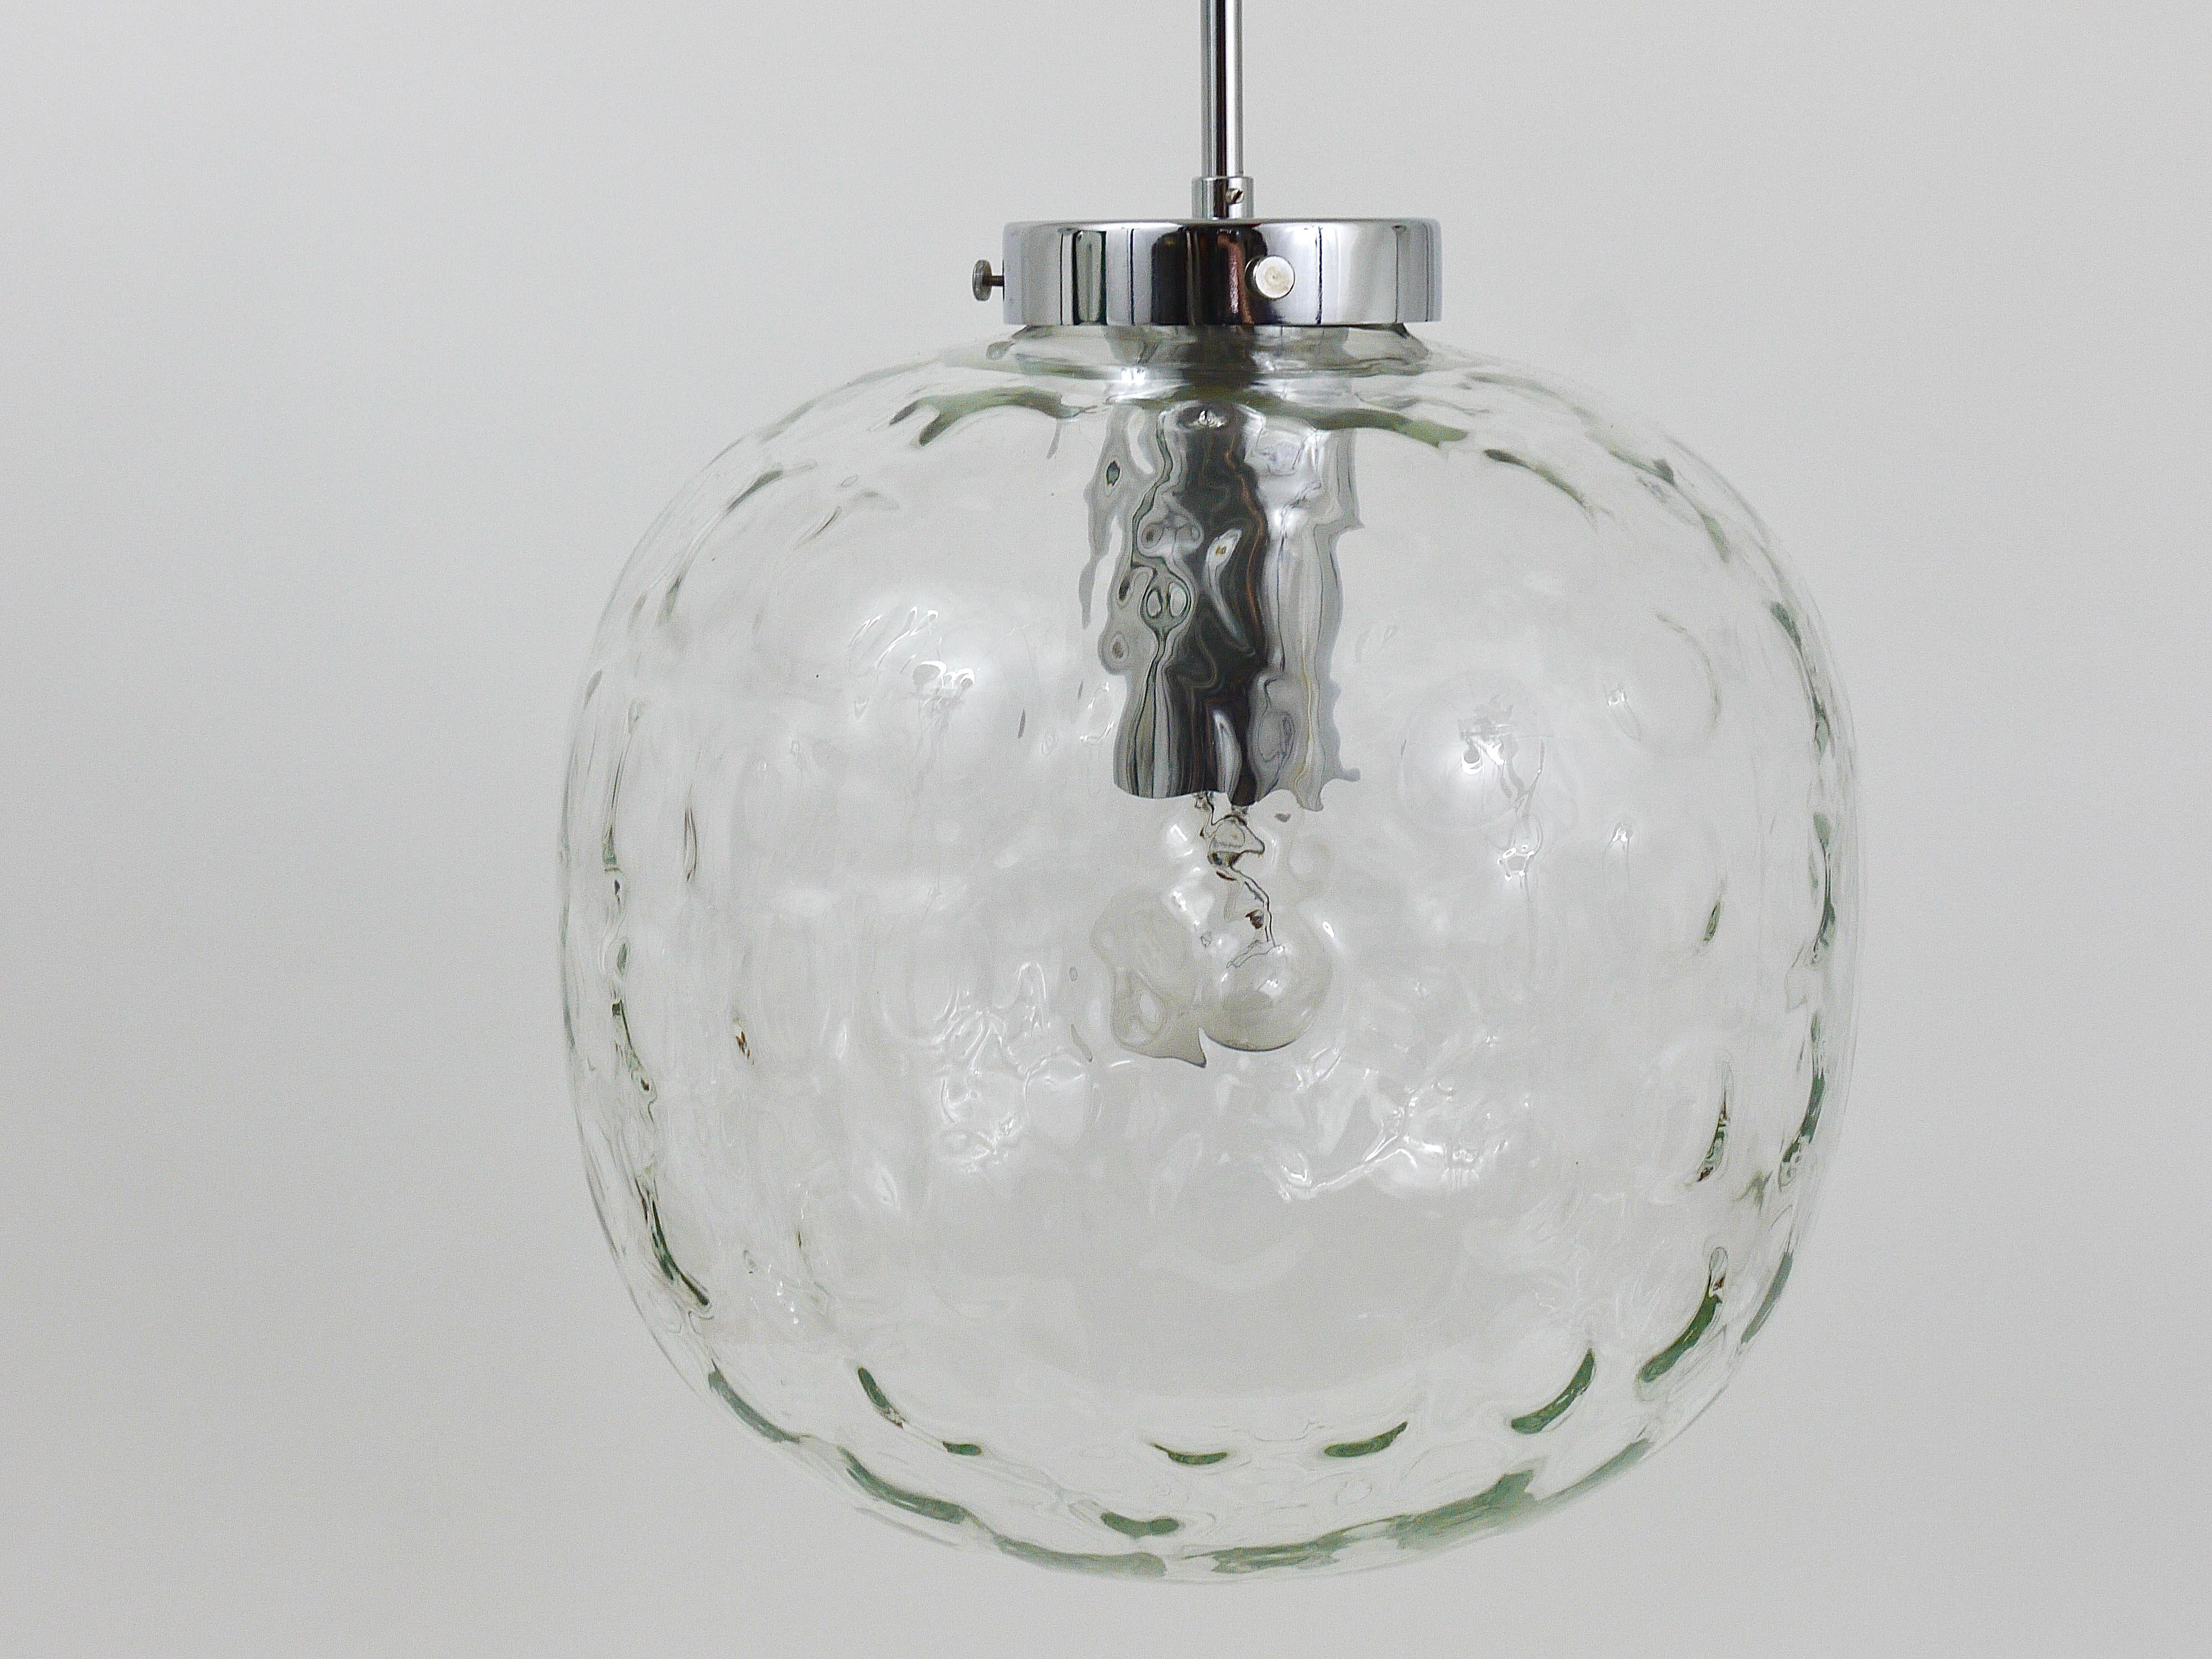 Large Bubble Melting Glass and Chrome Globe Pendant Lamp, Germany, 1970s For Sale 6